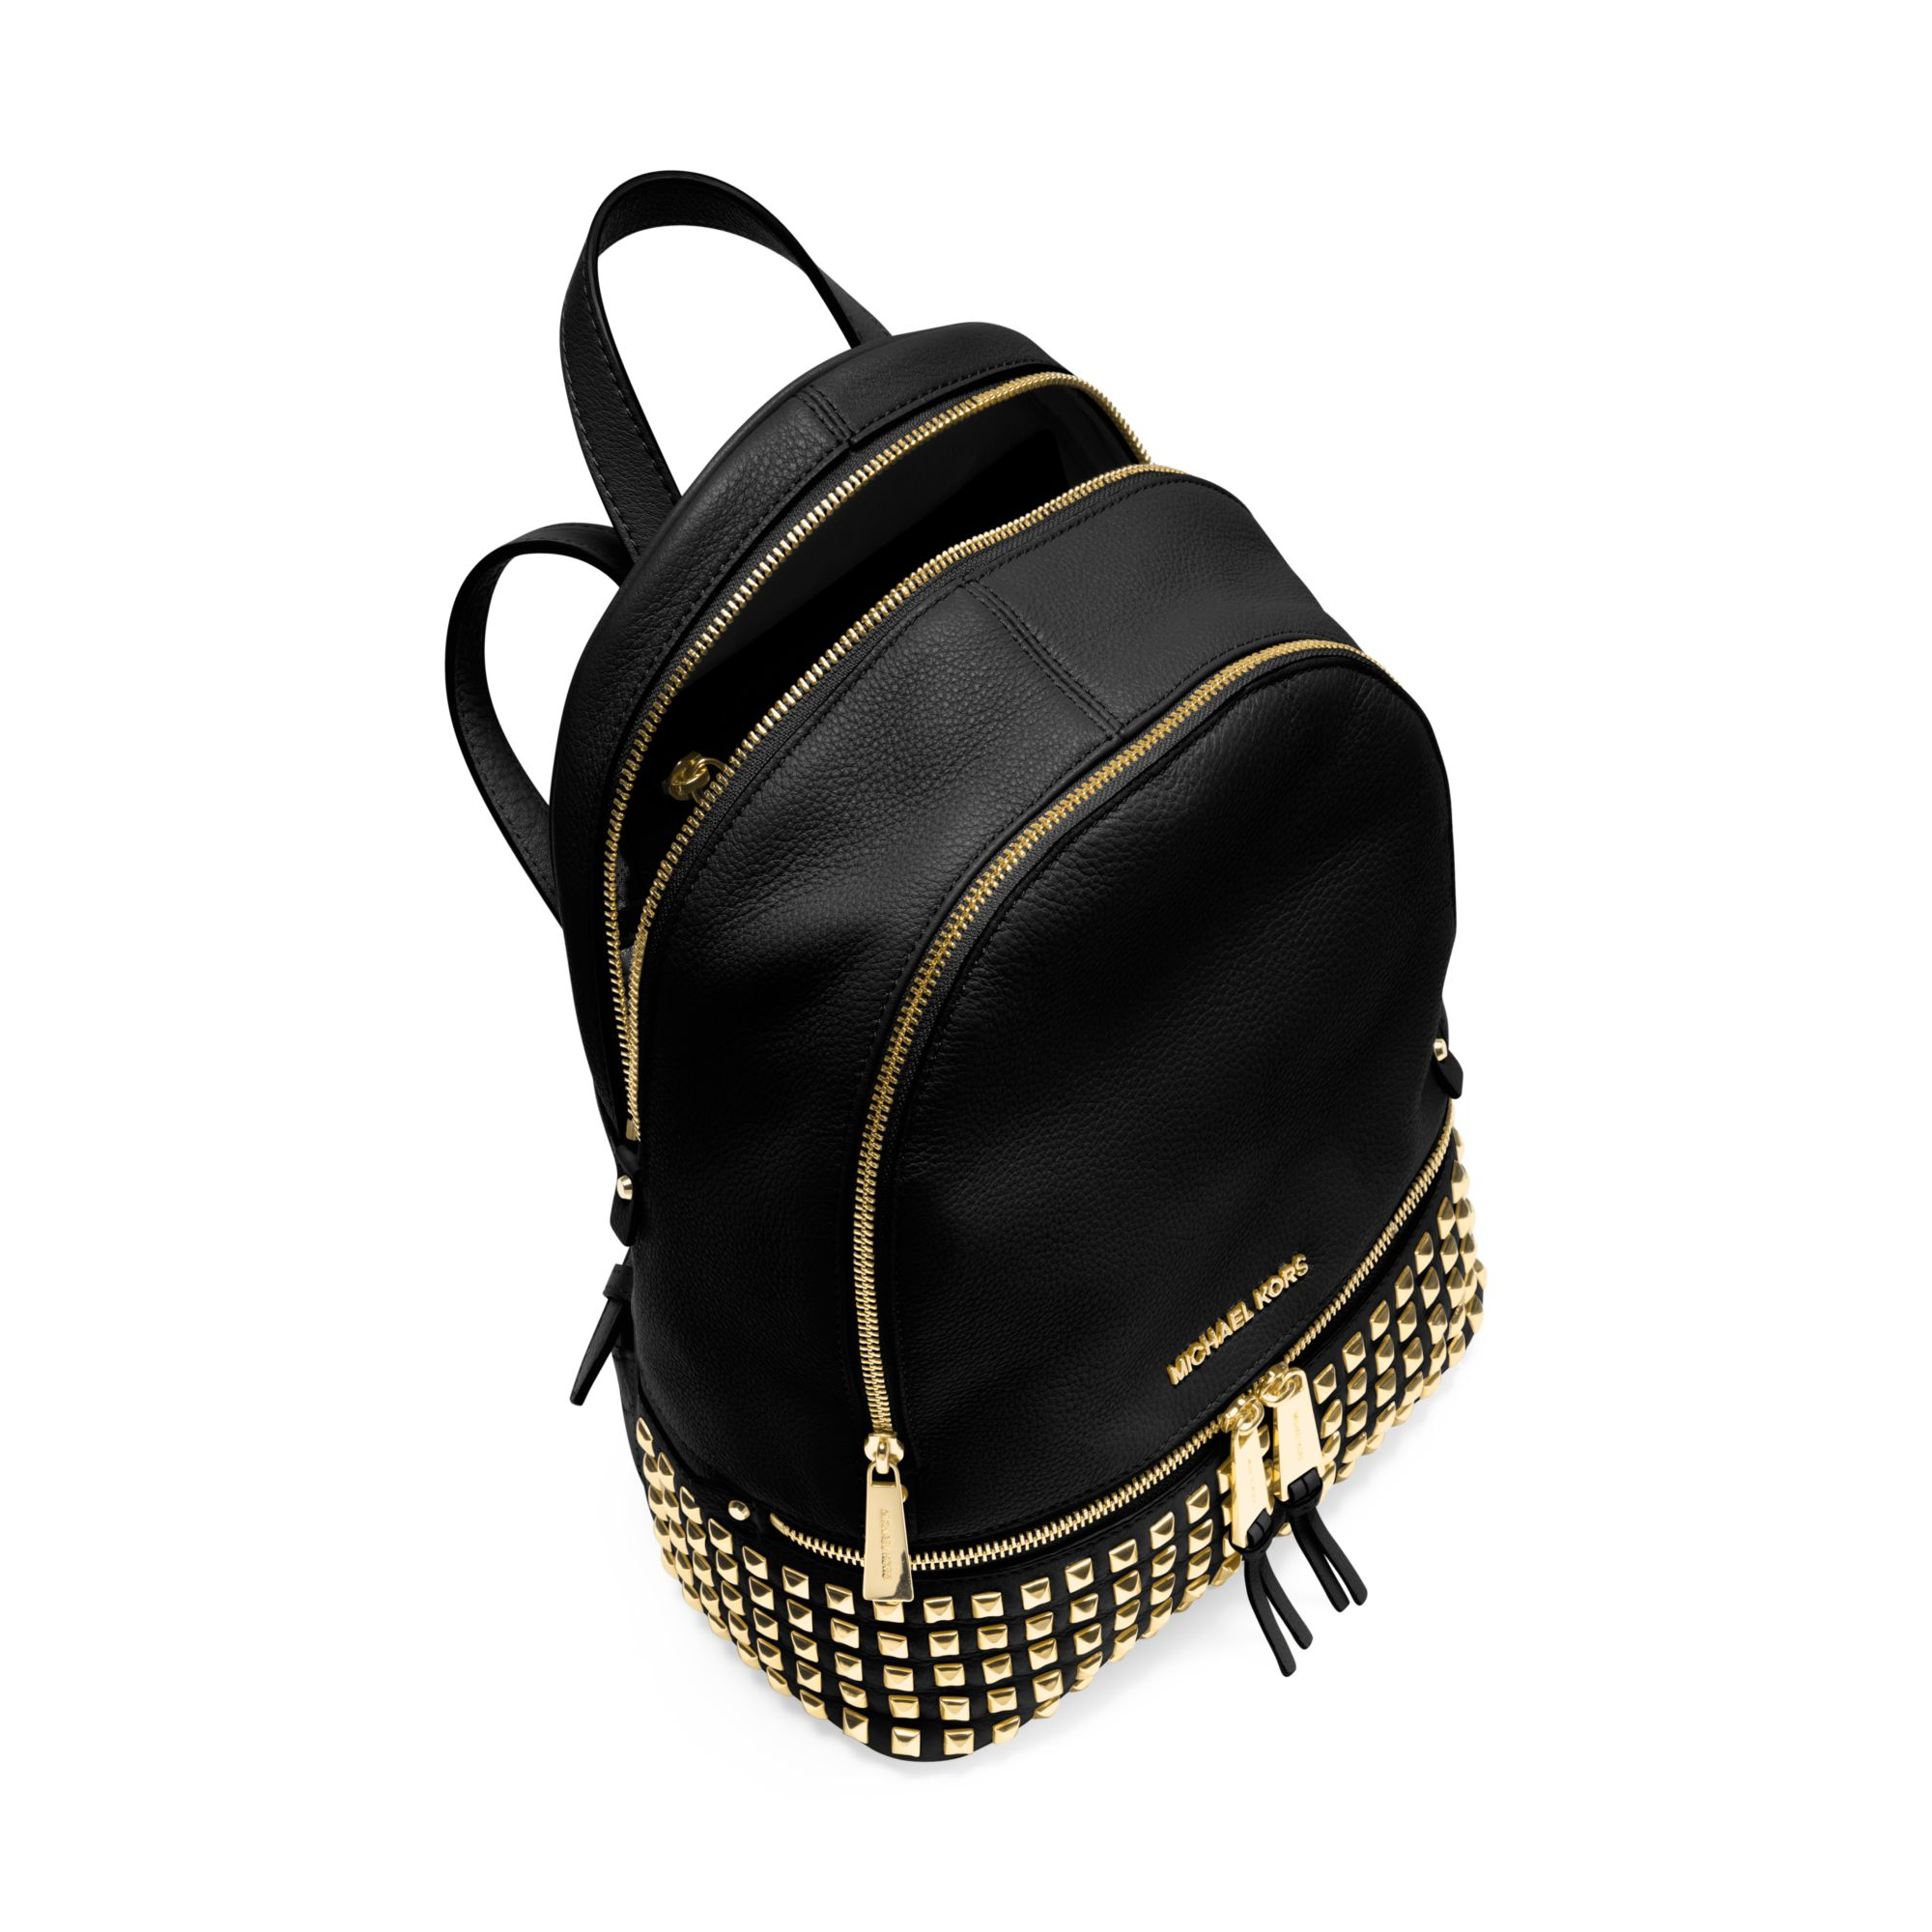 Michael kors Rhea Small Studded Leather Backpack in Black | Lyst